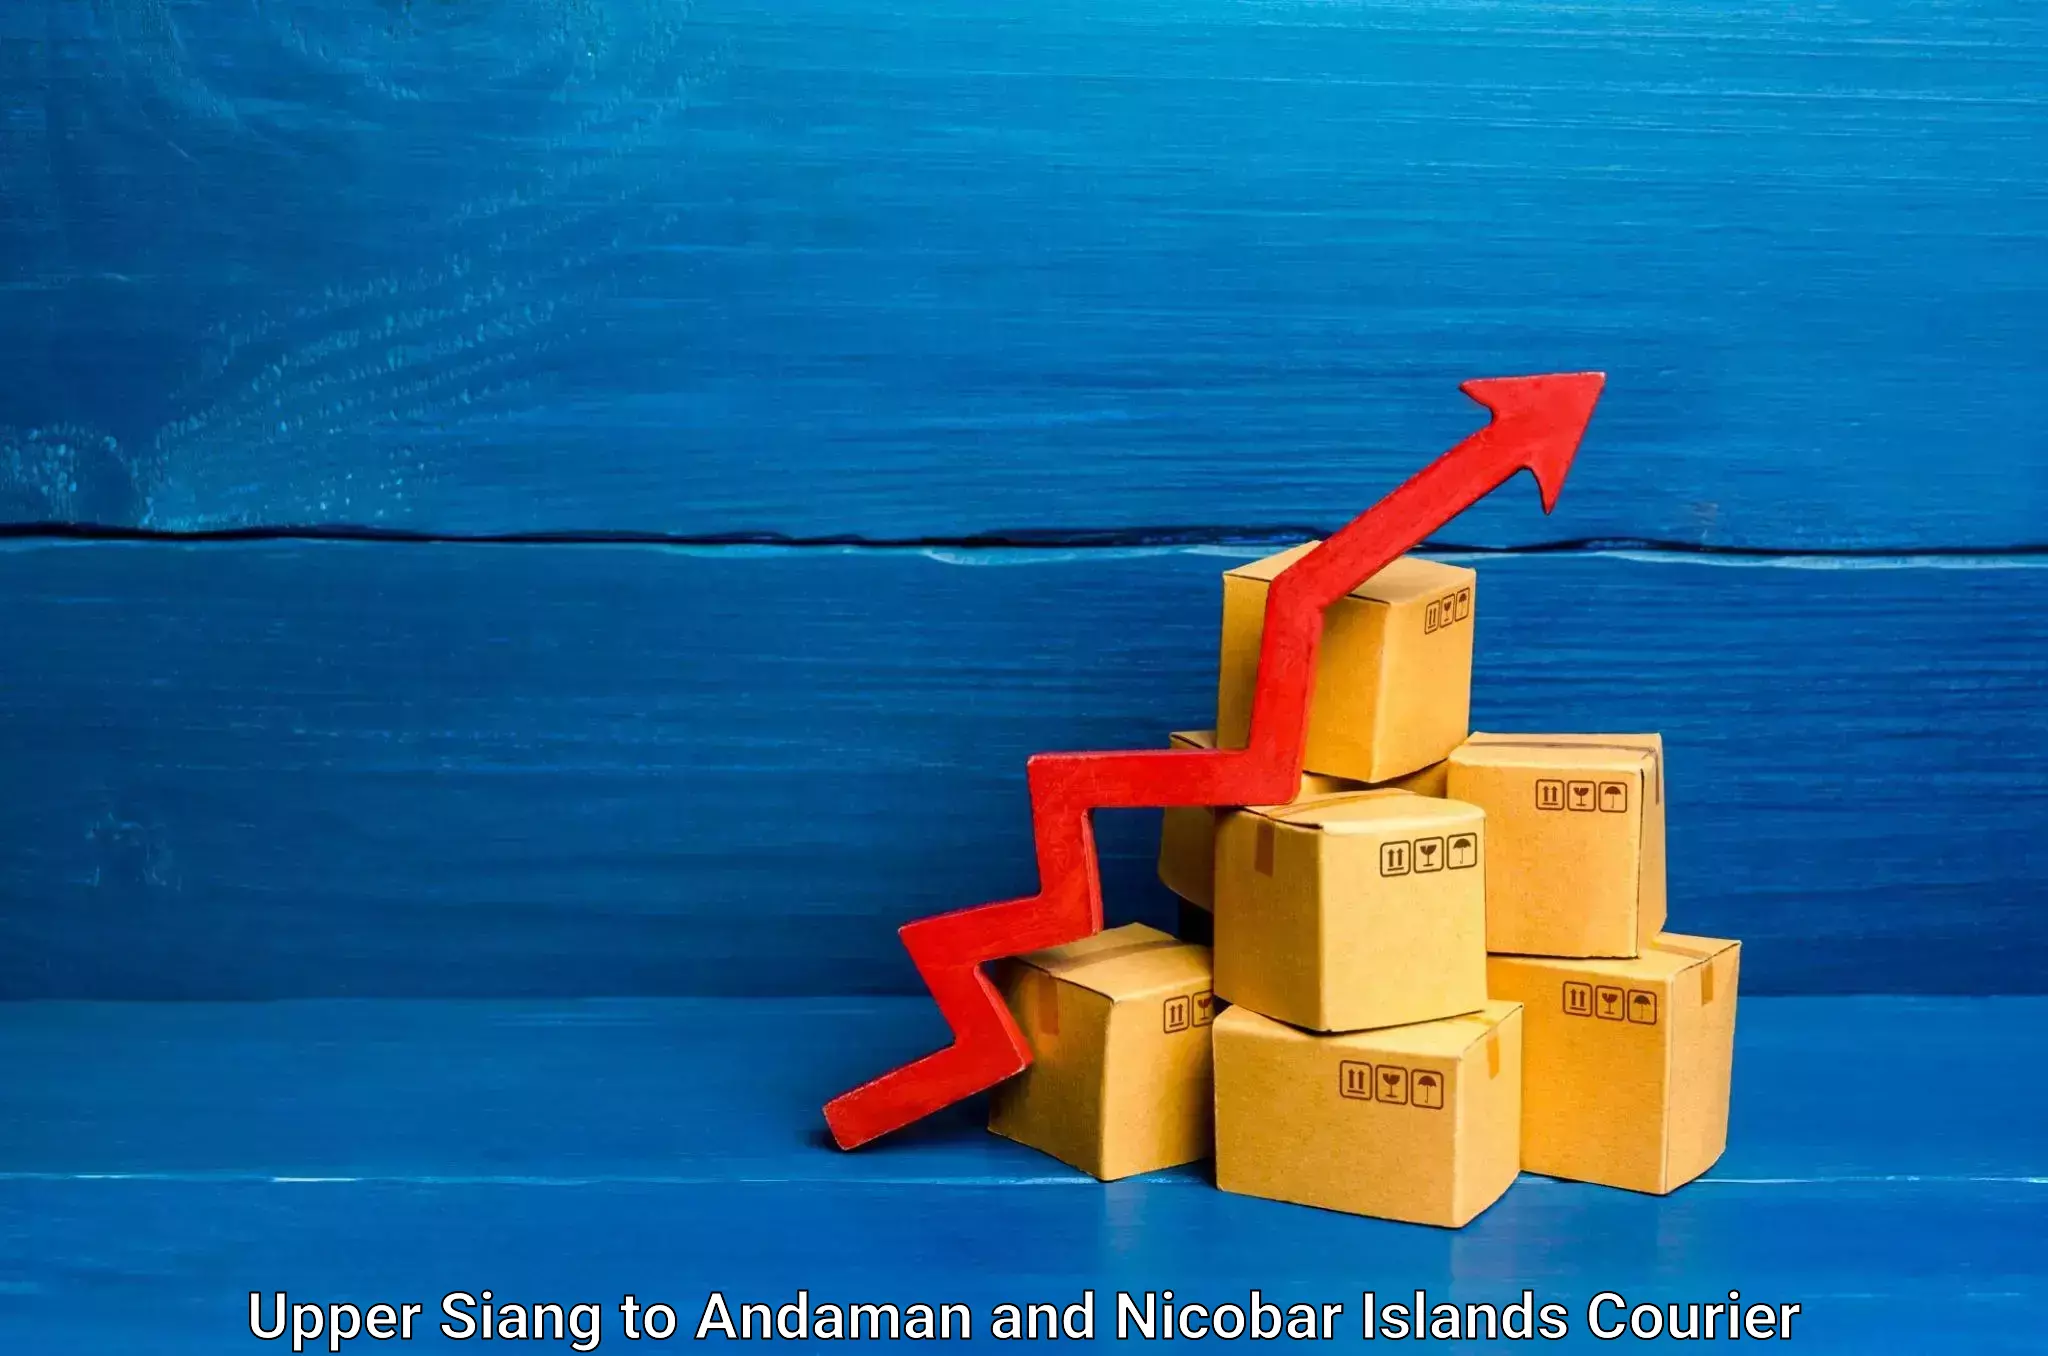 24-hour courier service Upper Siang to Andaman and Nicobar Islands